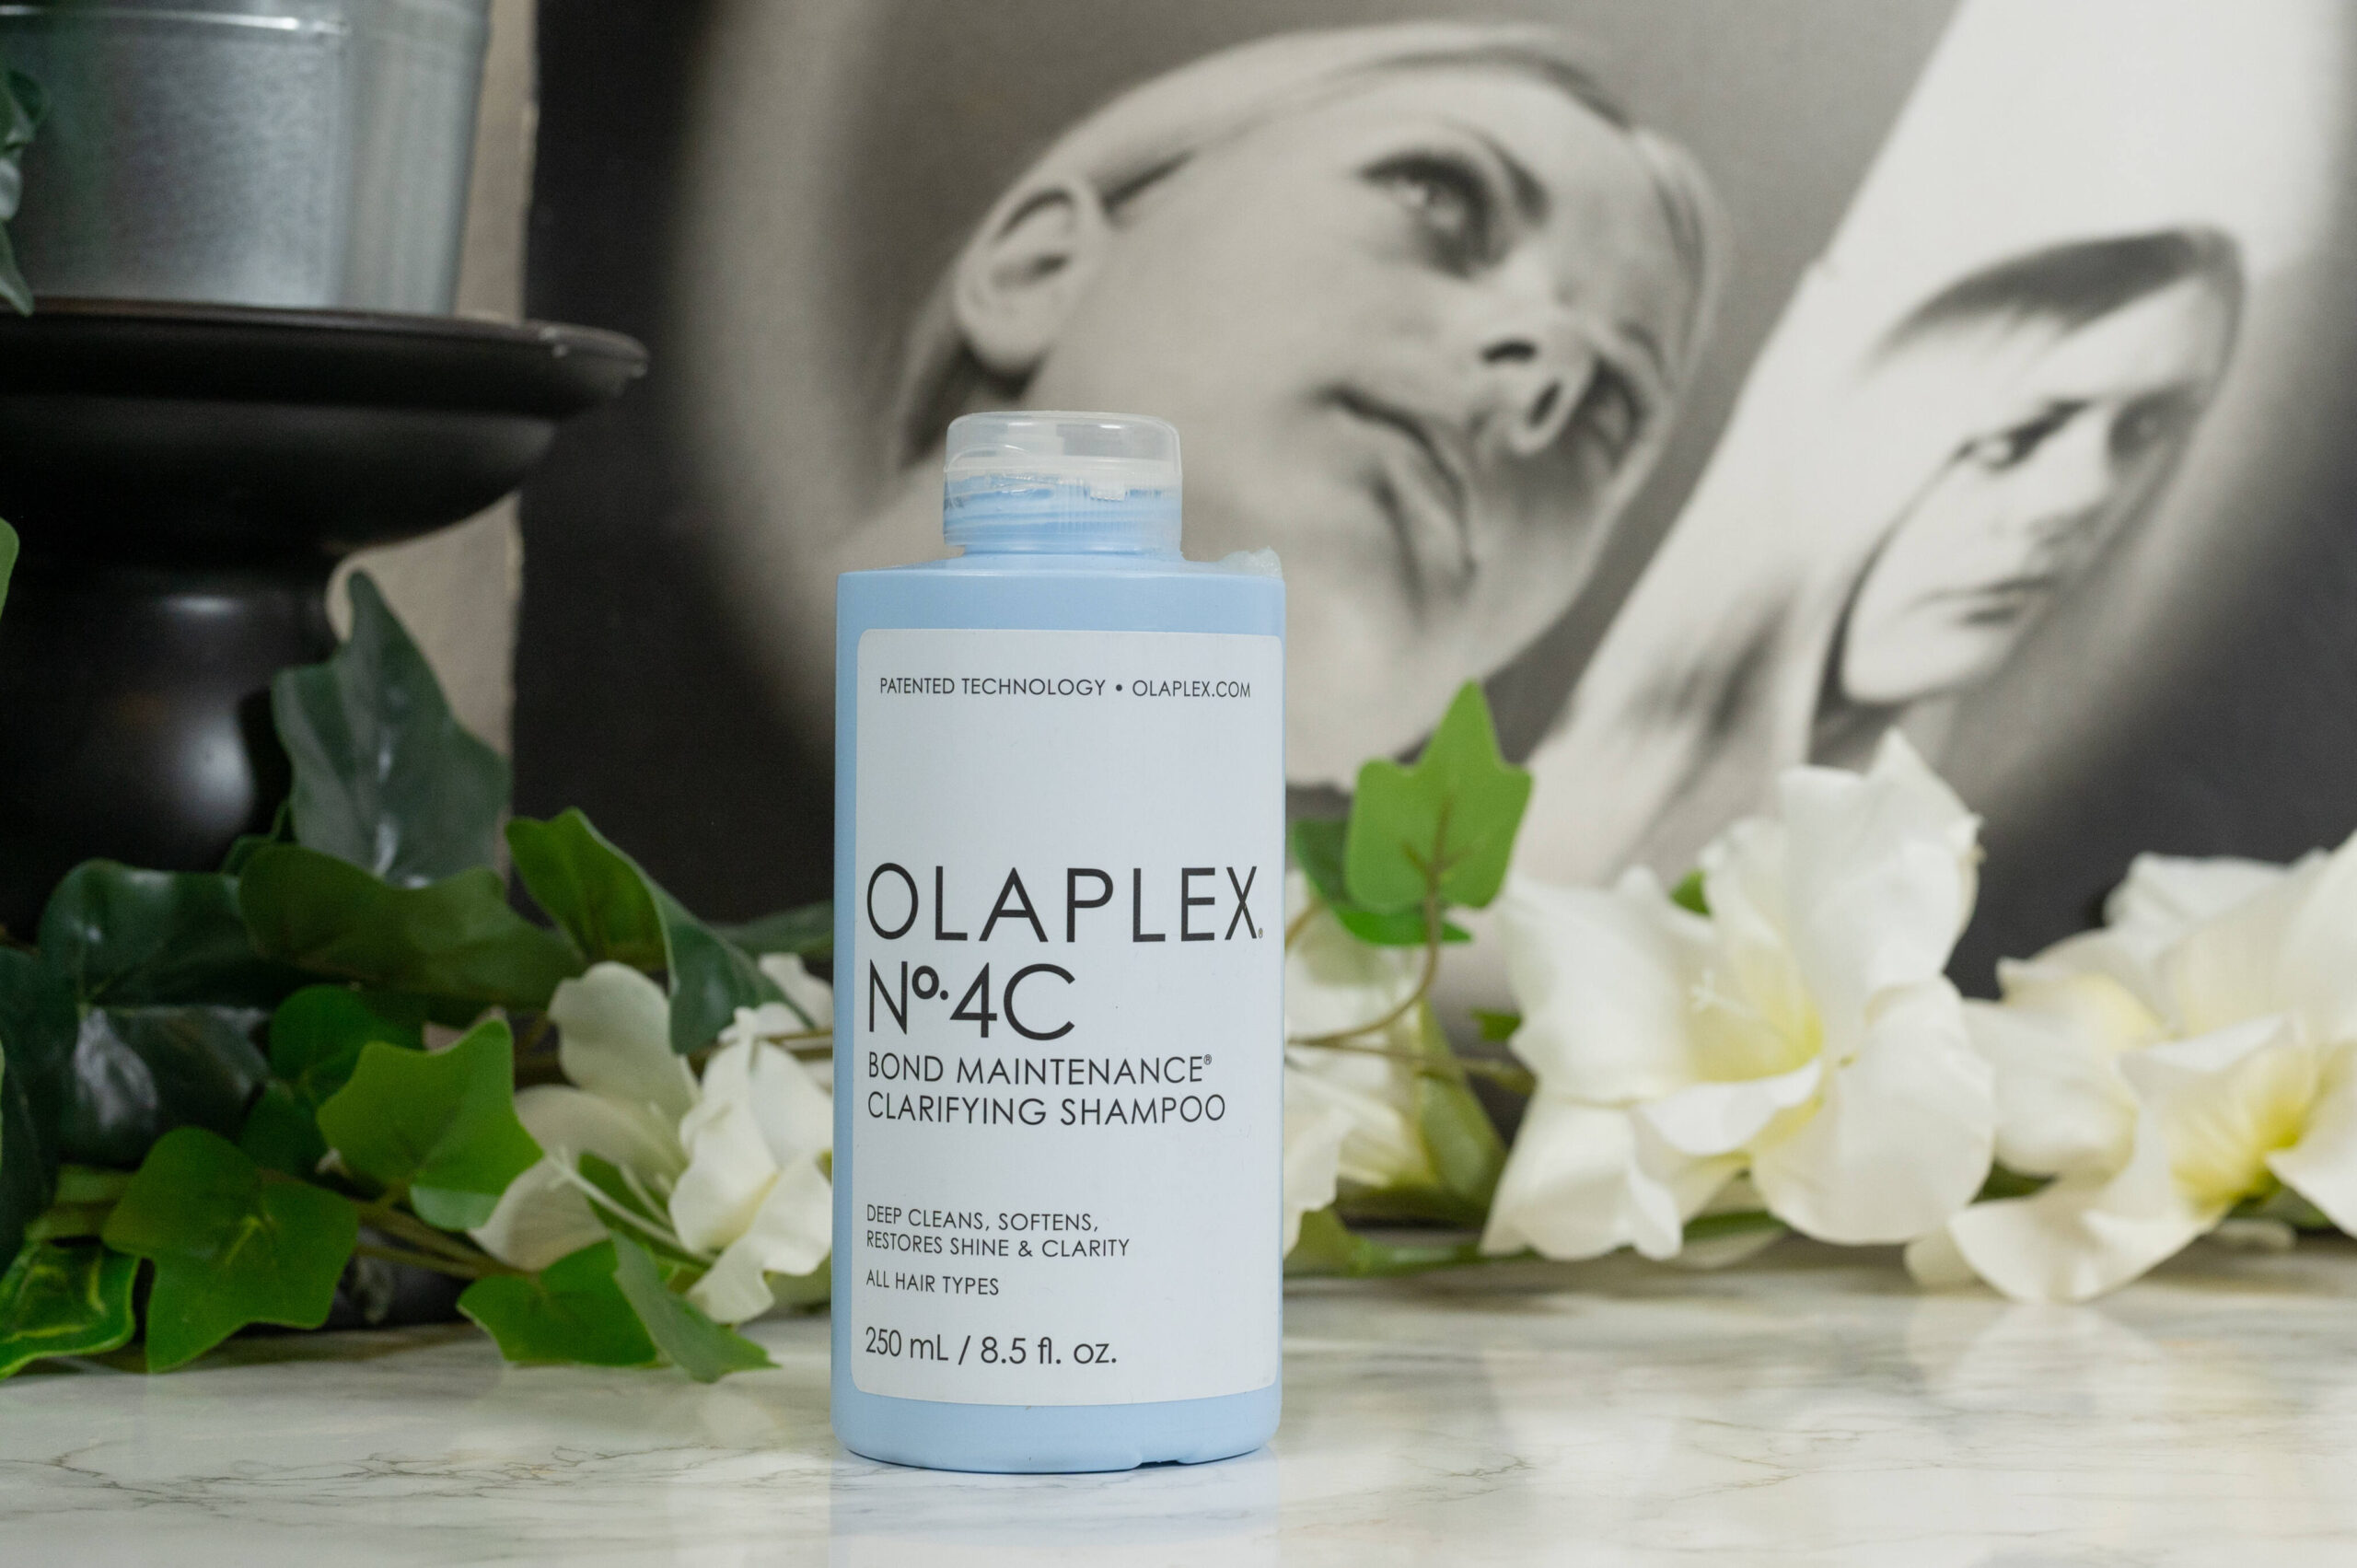 A bottle of Olaplex No 4C Bond Maintenance Clarifying Shampoo standing in front of white flowers on a dark background